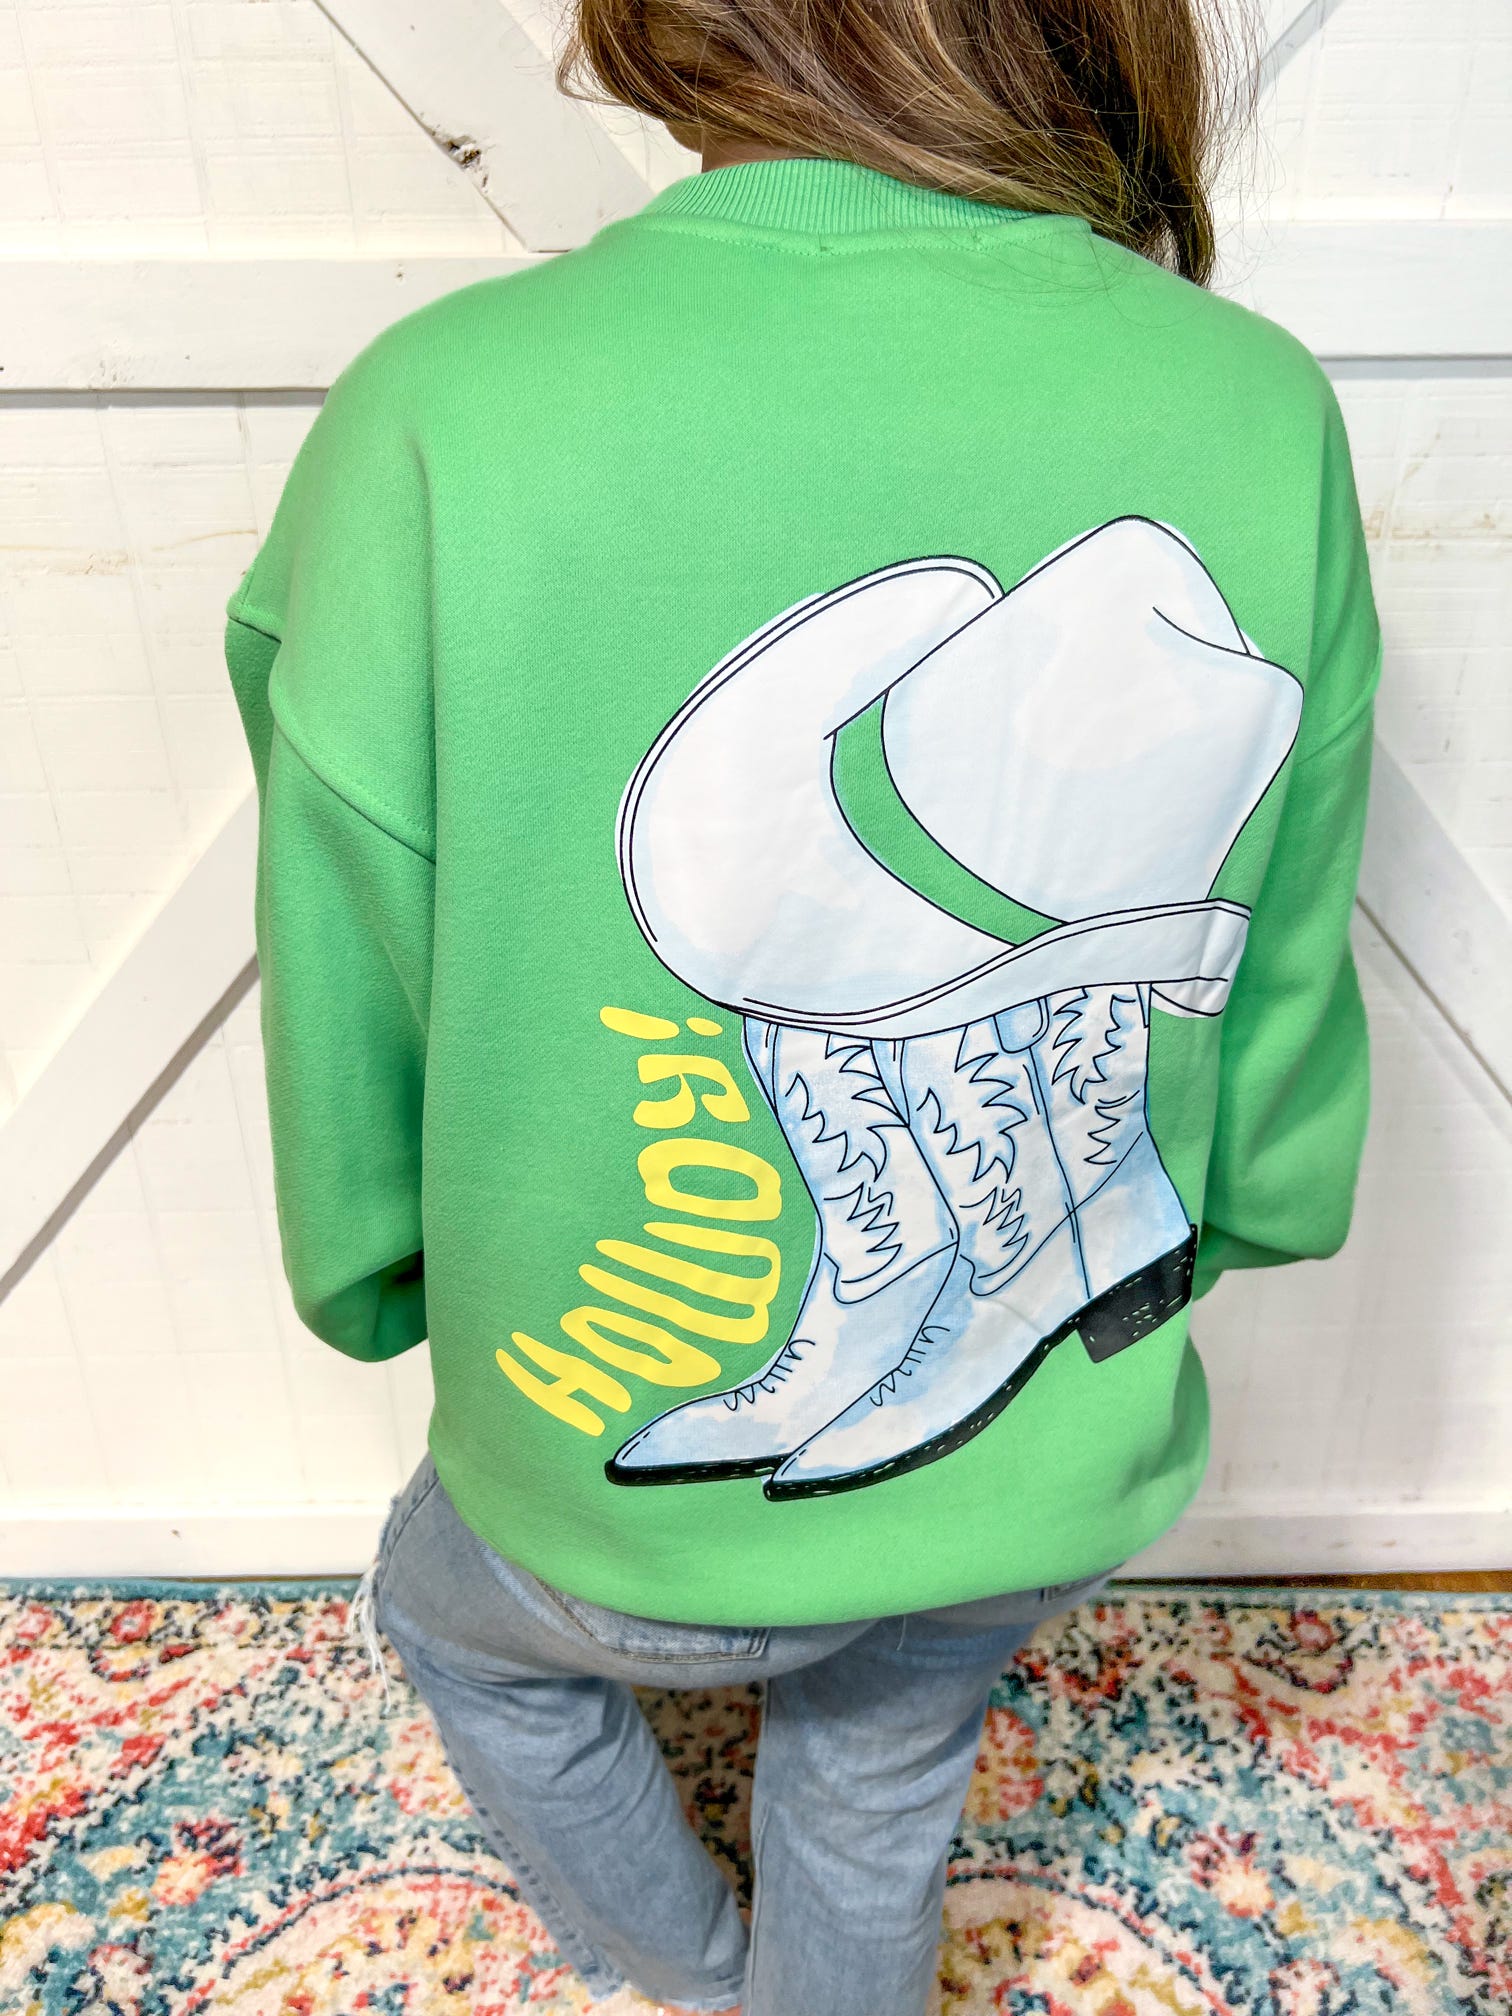 Woman modeling the back of our green sweatshirt showing a cowboy boot and saying Howdy big on the back